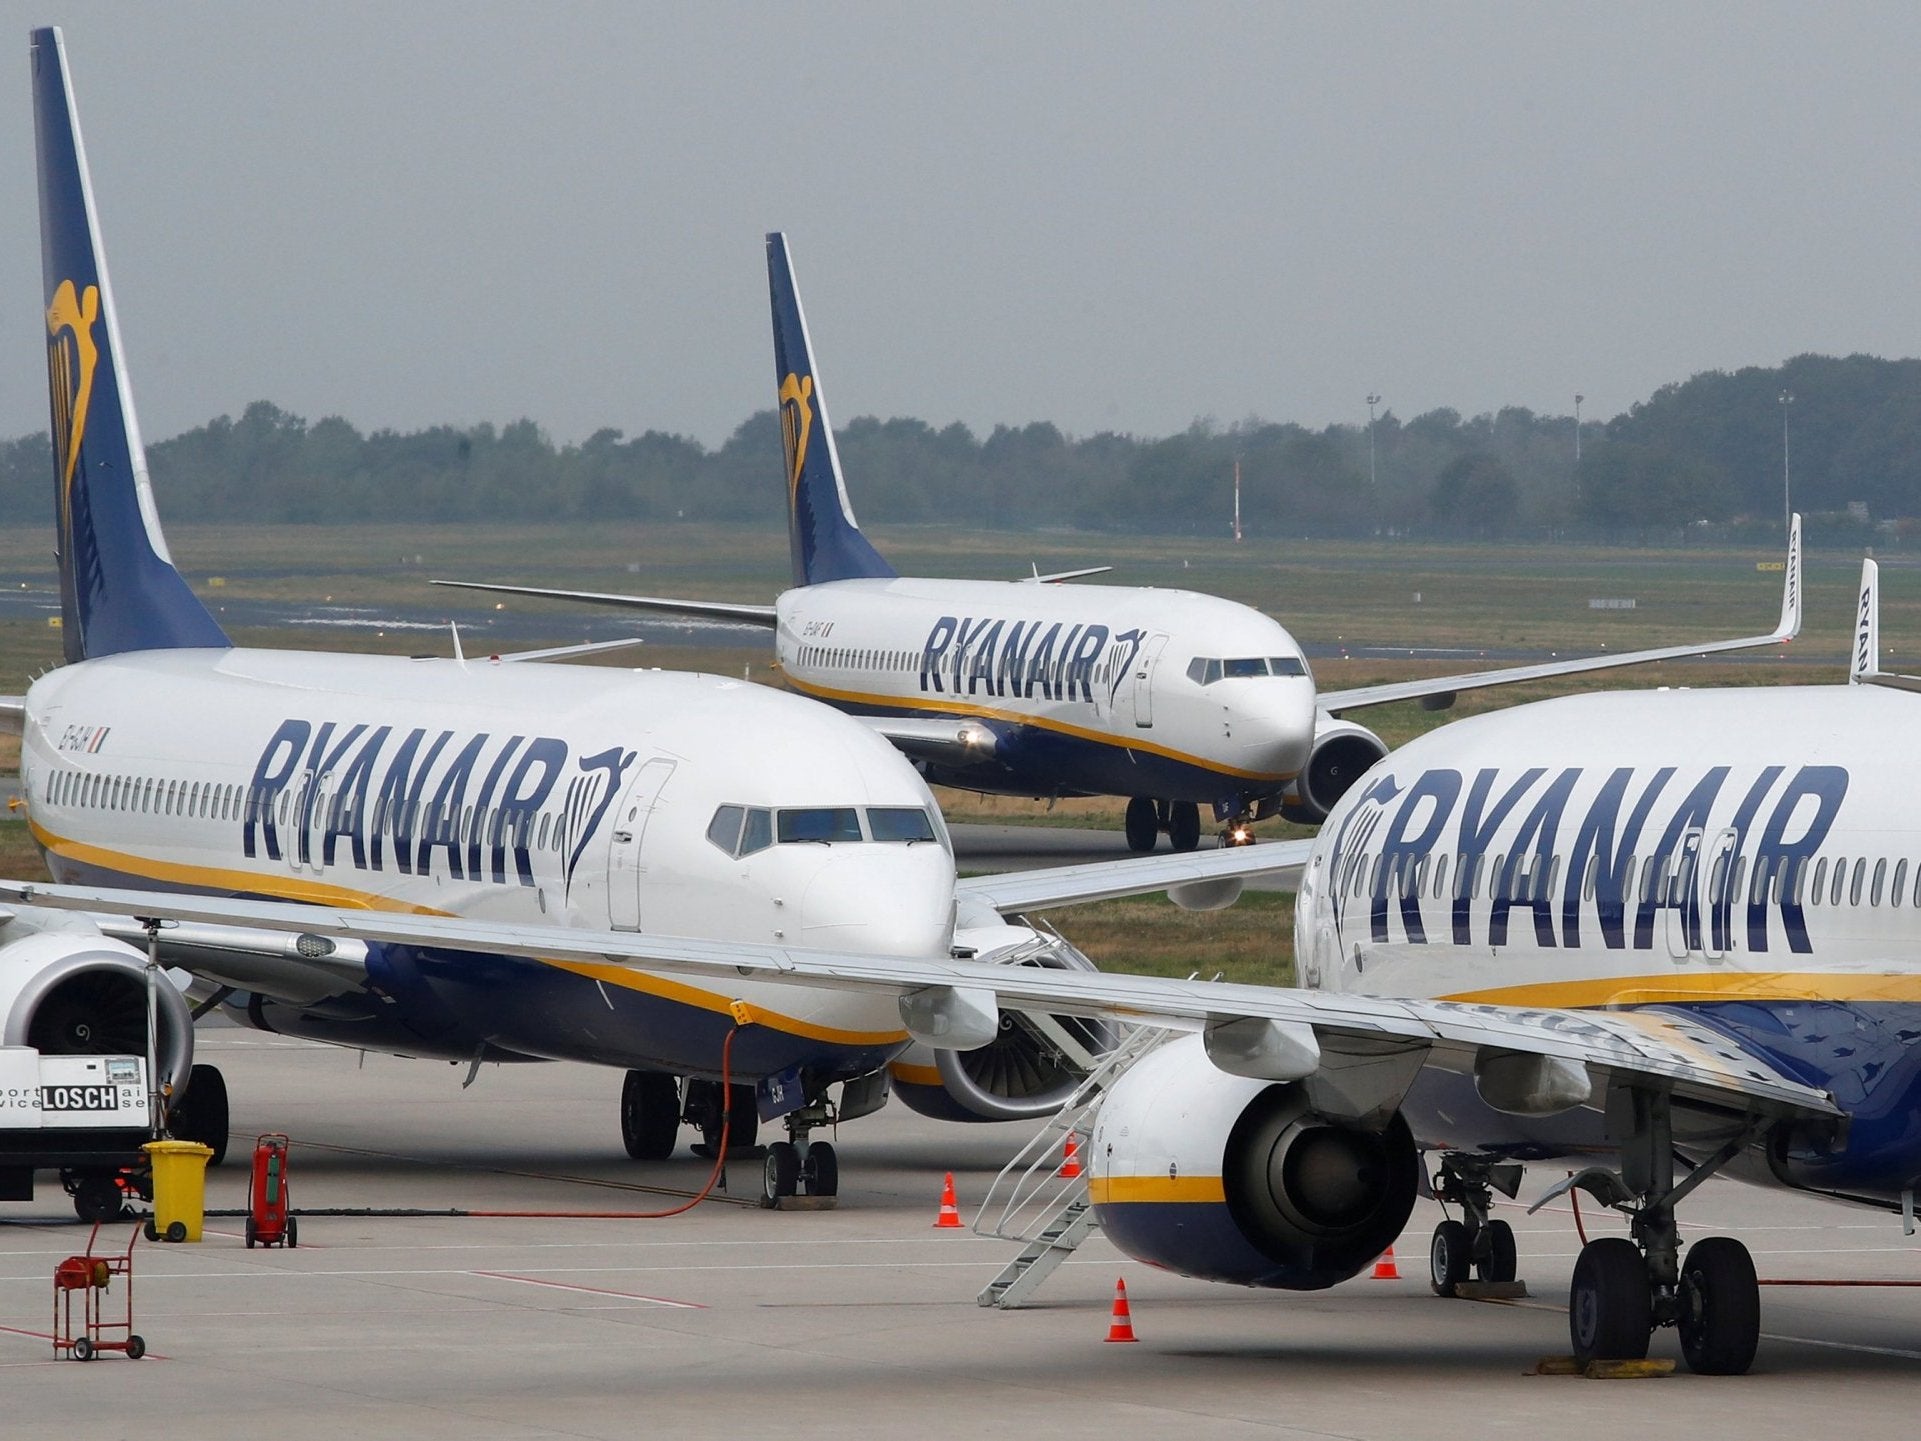 Many planes were parked last year due to industrial action